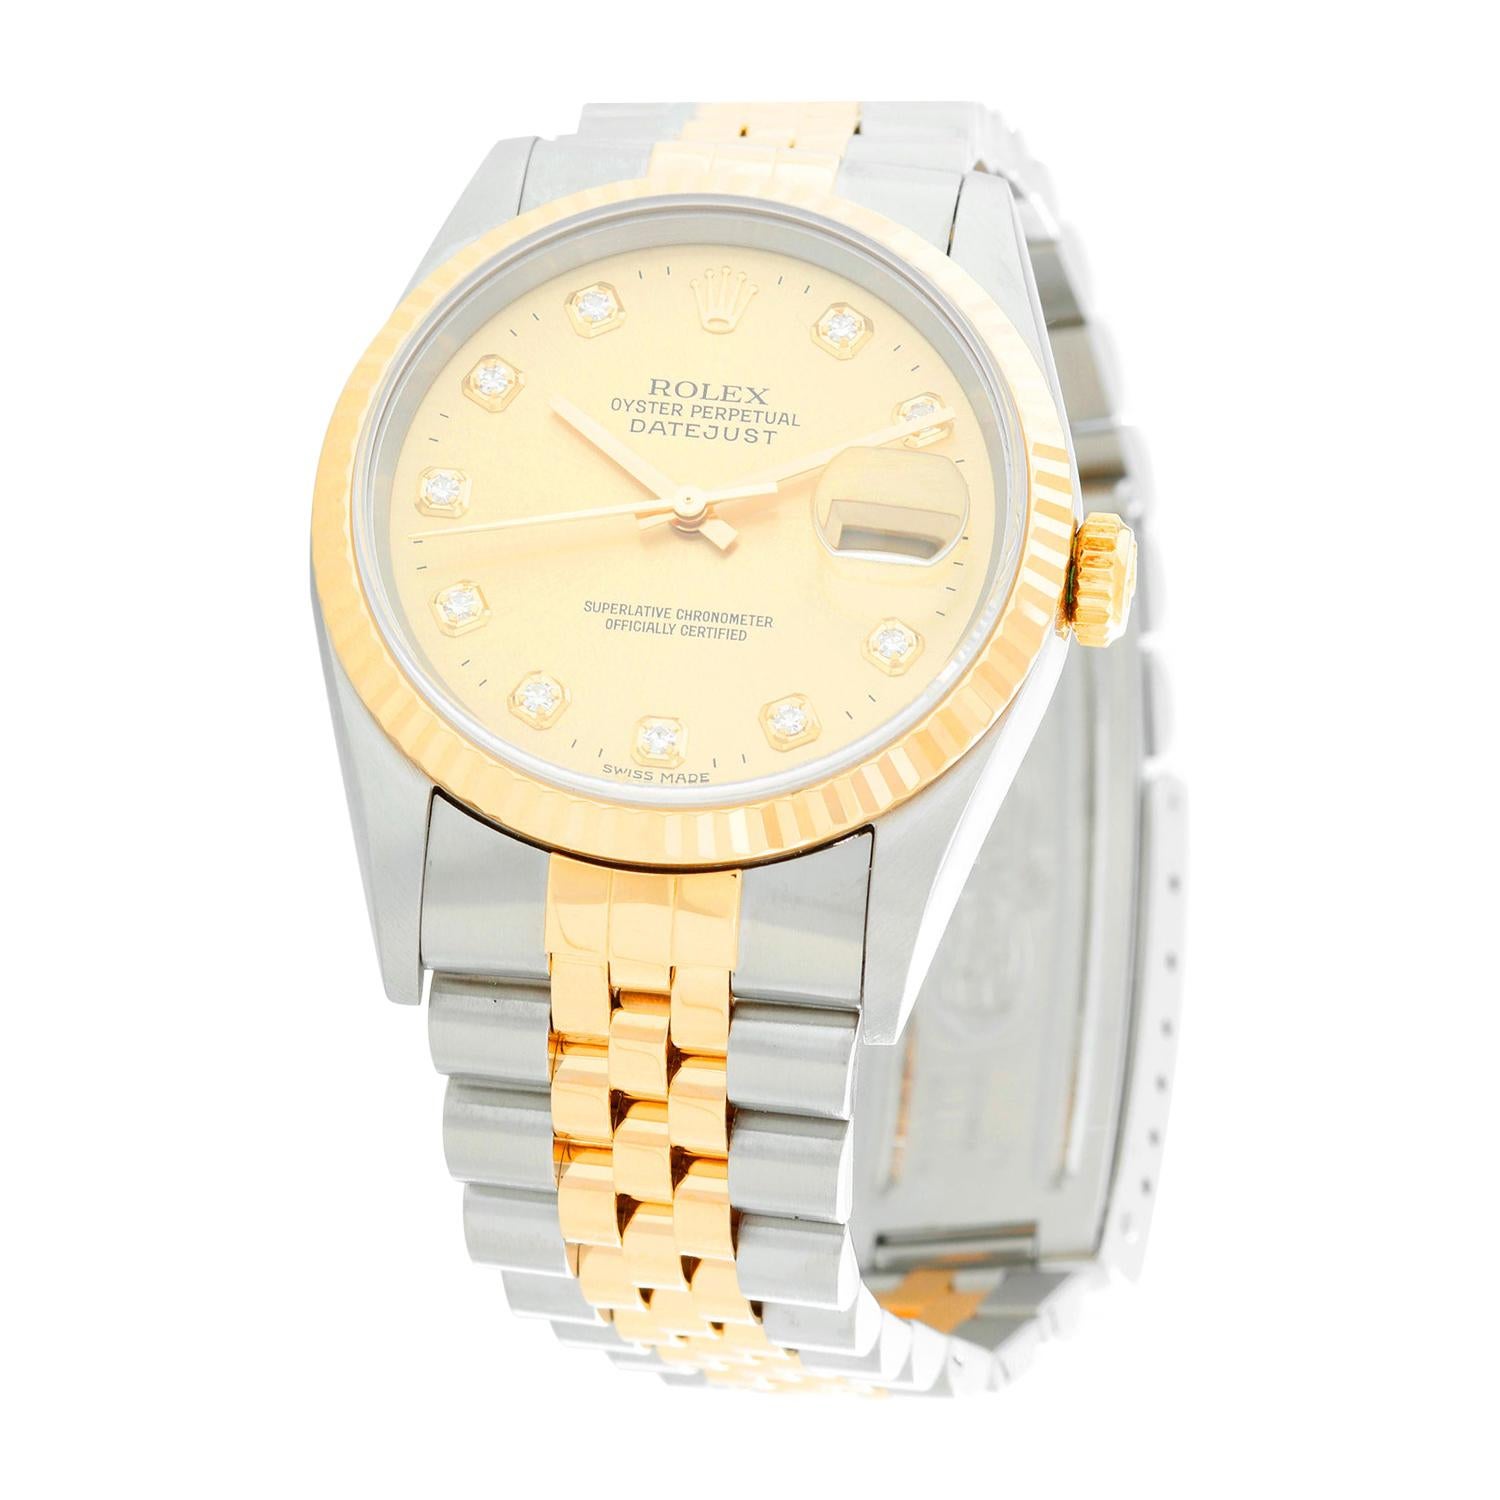 Rolex Datejust 2-Tone Men's Steel & Gold Watch 16233 - Automatic winding, Quickset, sapphire crystal. Stainless steel case with yellow gold bezel  (36mm diameter). Factory Champagne diamond dial. Stainless steel and 18k yellow gold Jubilee bracelet.